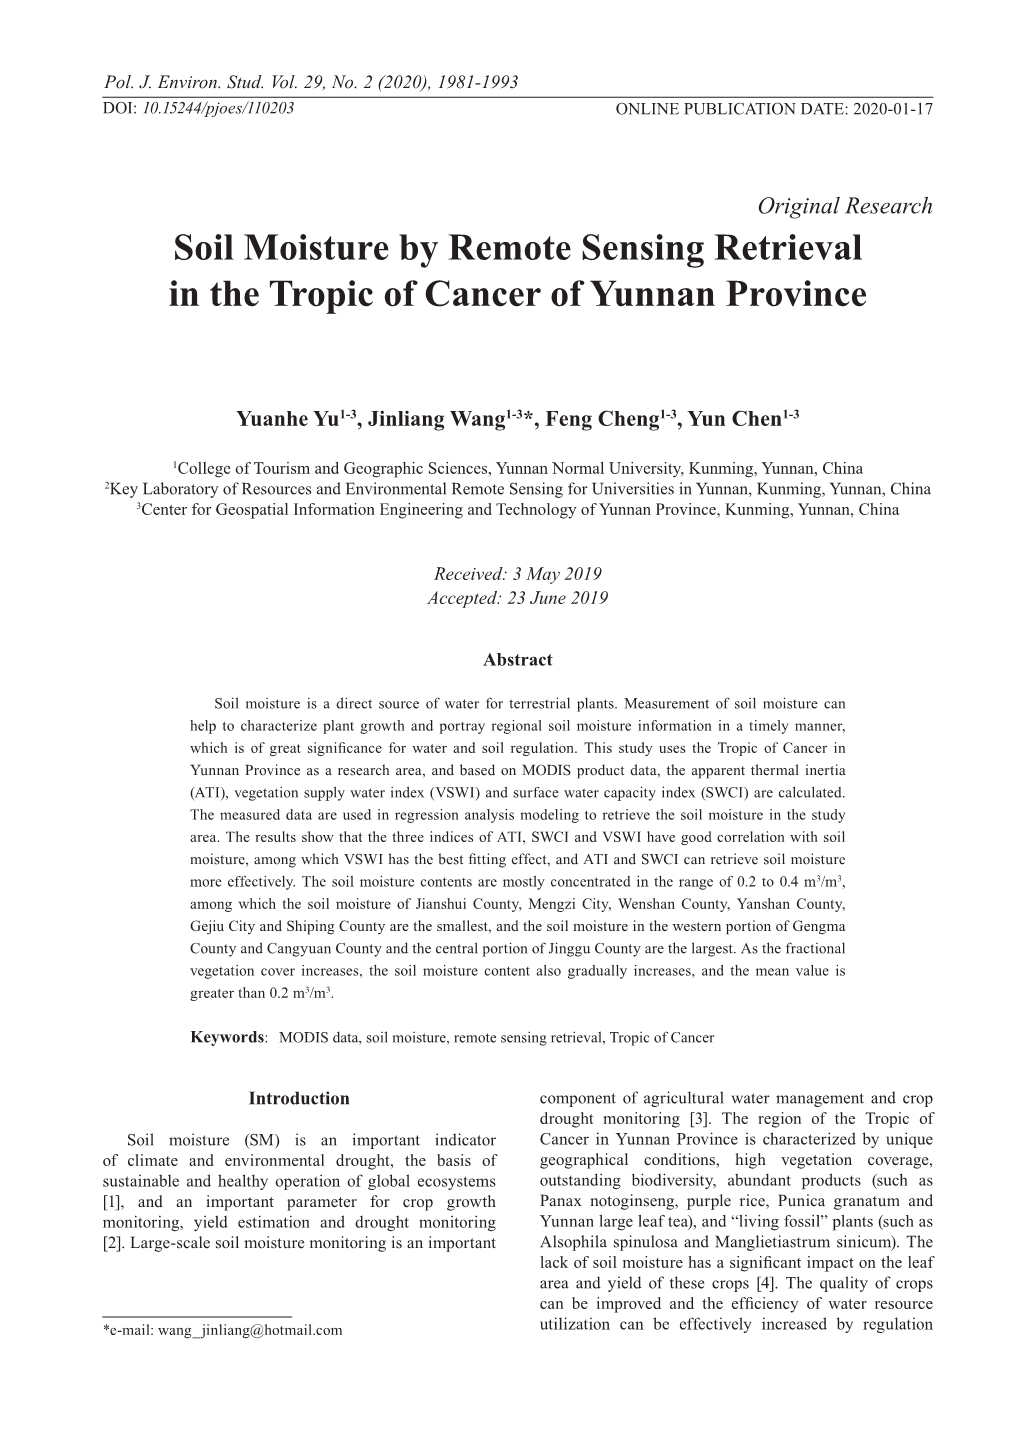 Soil Moisture by Remote Sensing Retrieval in the Tropic of Cancer of Yunnan Province